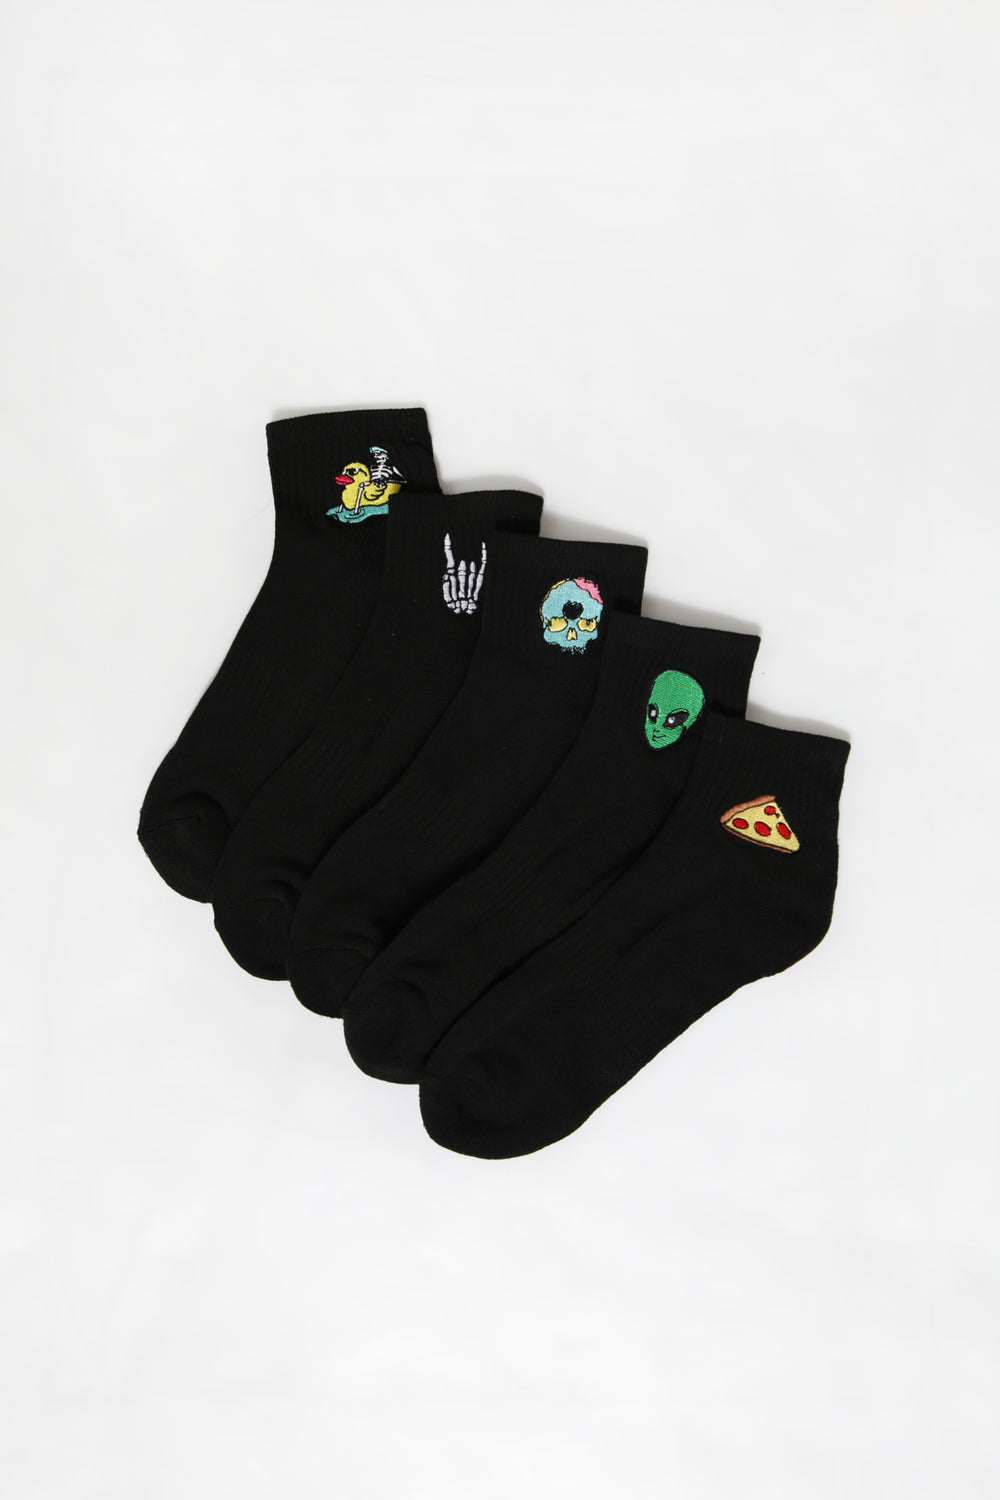 Arsenic Youth Embroidered Ankle Socks 5-Pack Black